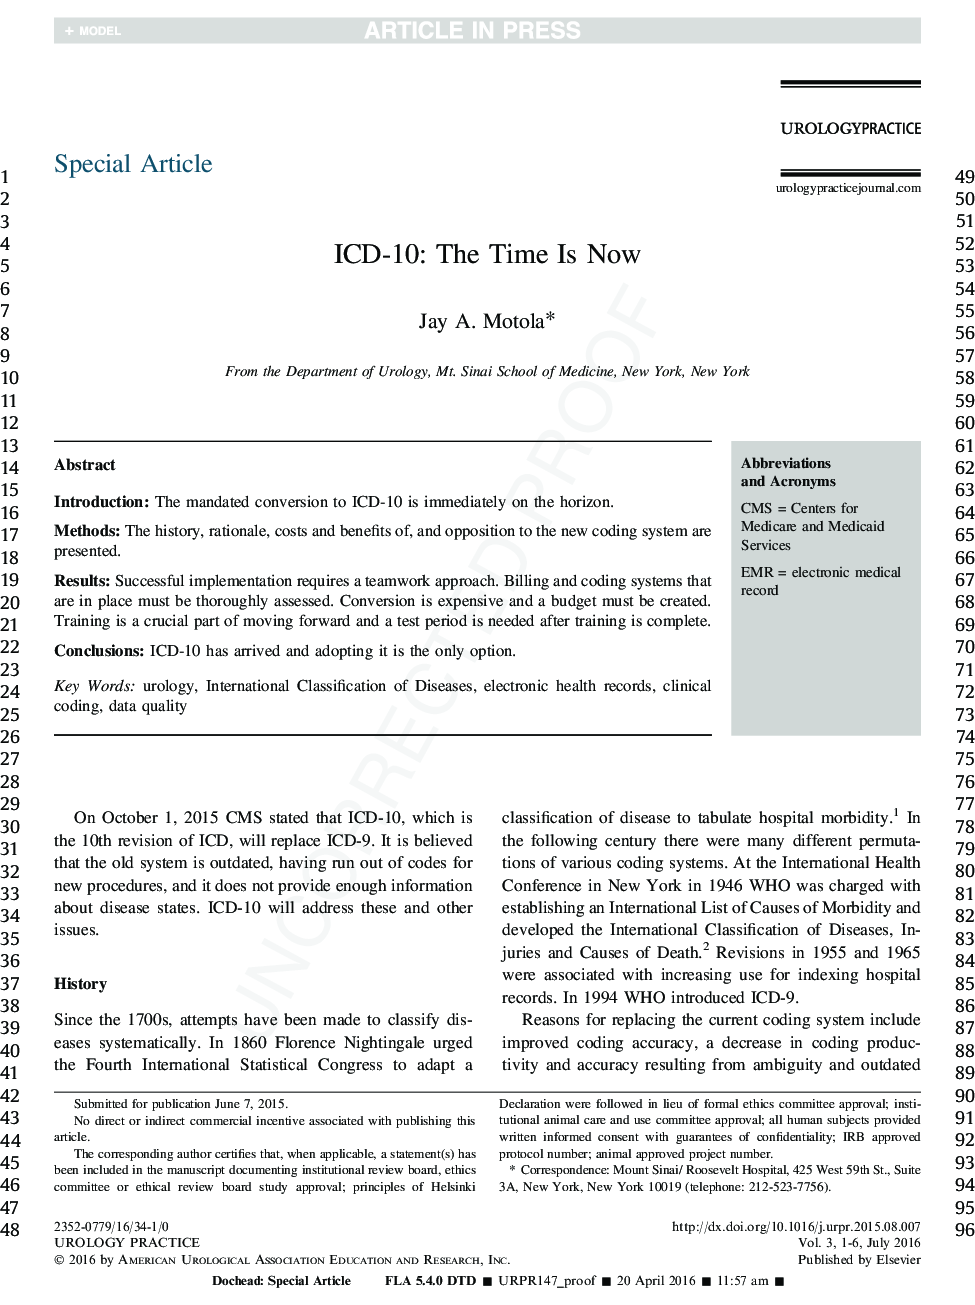 Special Article: ICD-10: The Time is Now